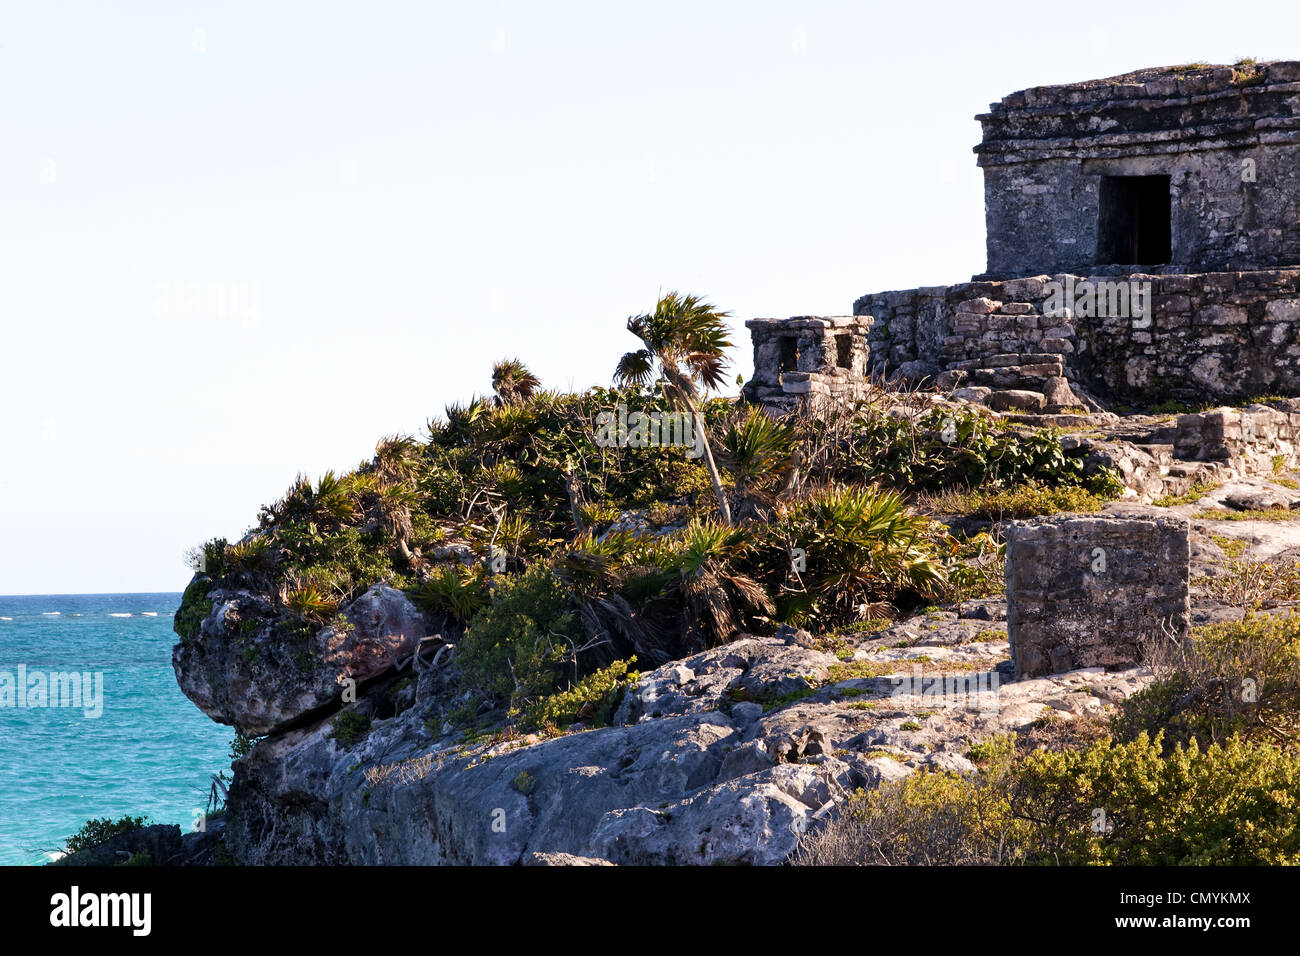 Cliff and Ruins at the Mayan archaeological zone in Tulum, Quintana Roo, Mexico. Stock Photo